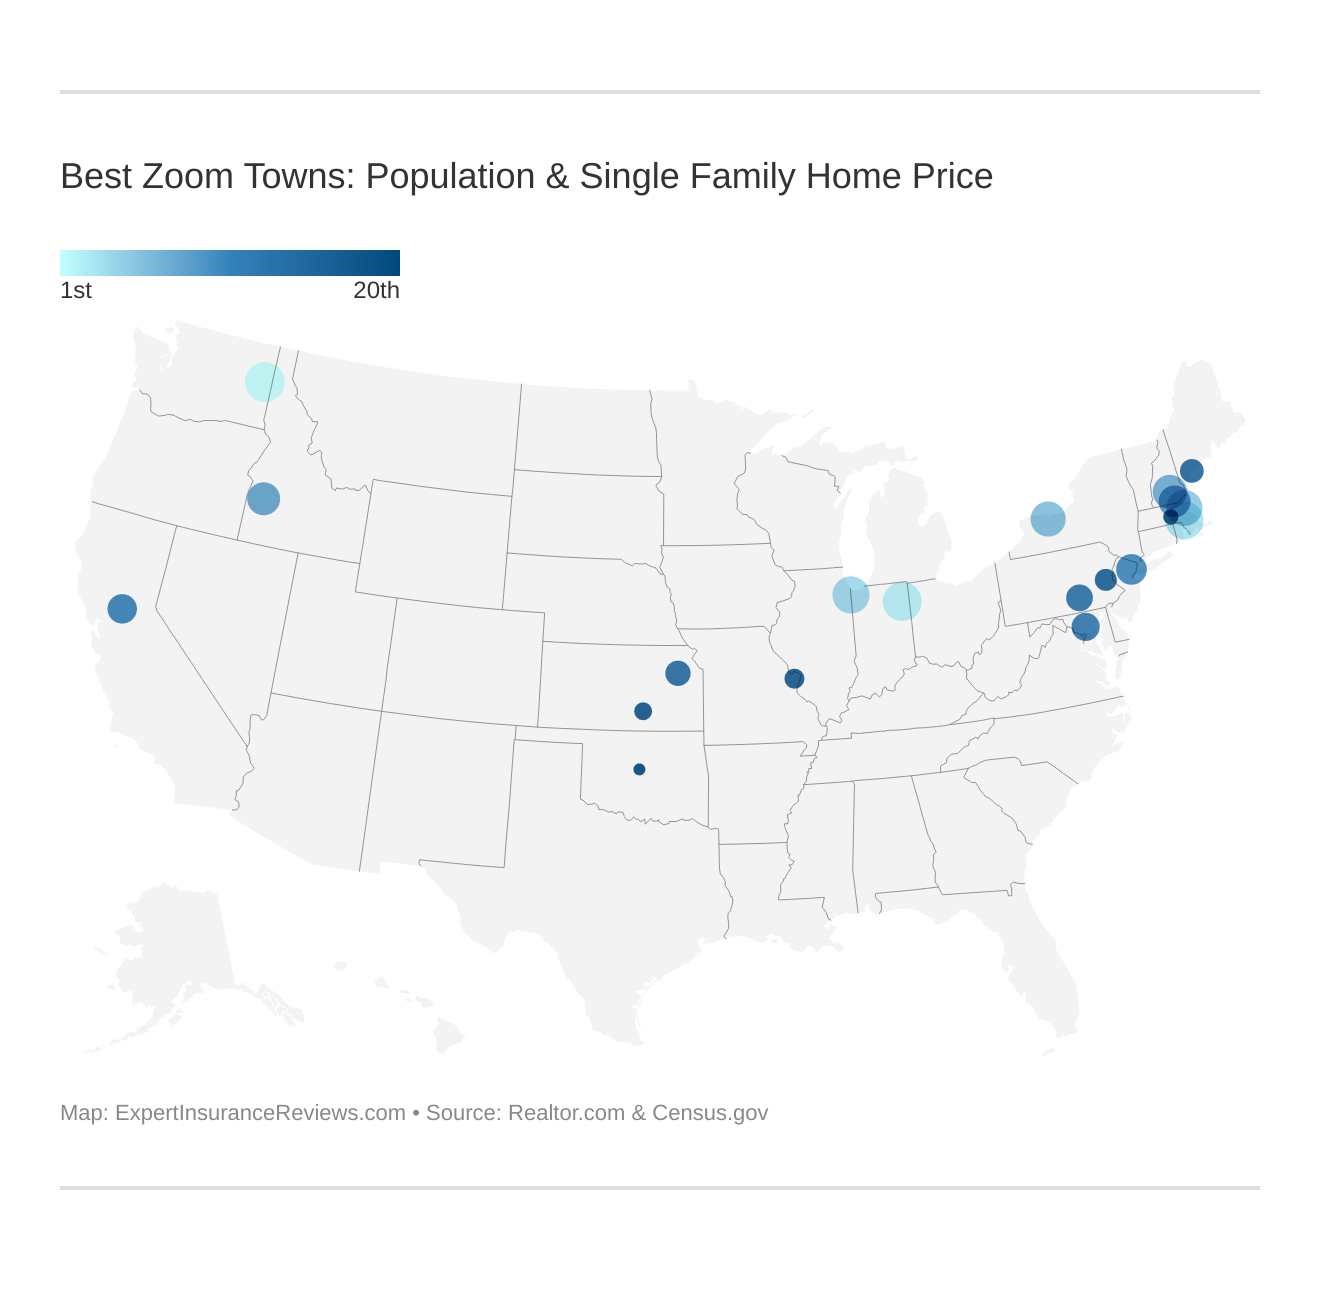 Best Zoom Towns: Population & Single Family Home Price